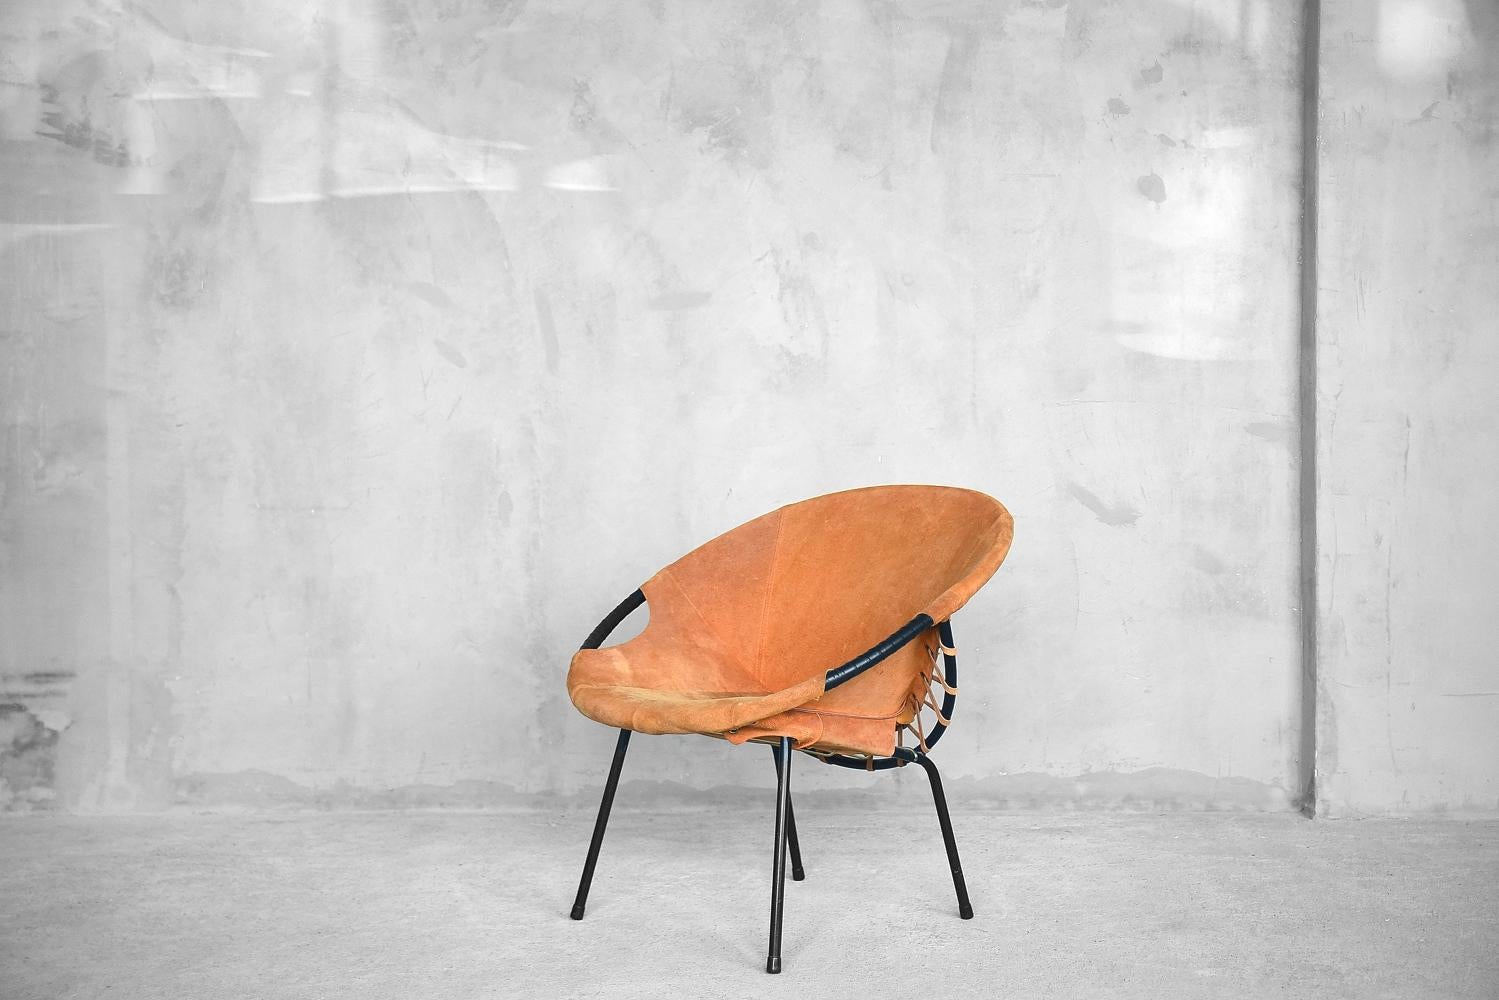 This circle chair or balloon chair was designed by Lusch Erzeugnis for Lusch & Co, in Germany during the 1960s. It features a black metal frame and suede leather seat. This chair is in original vintage condition and has traces of age: scratches on